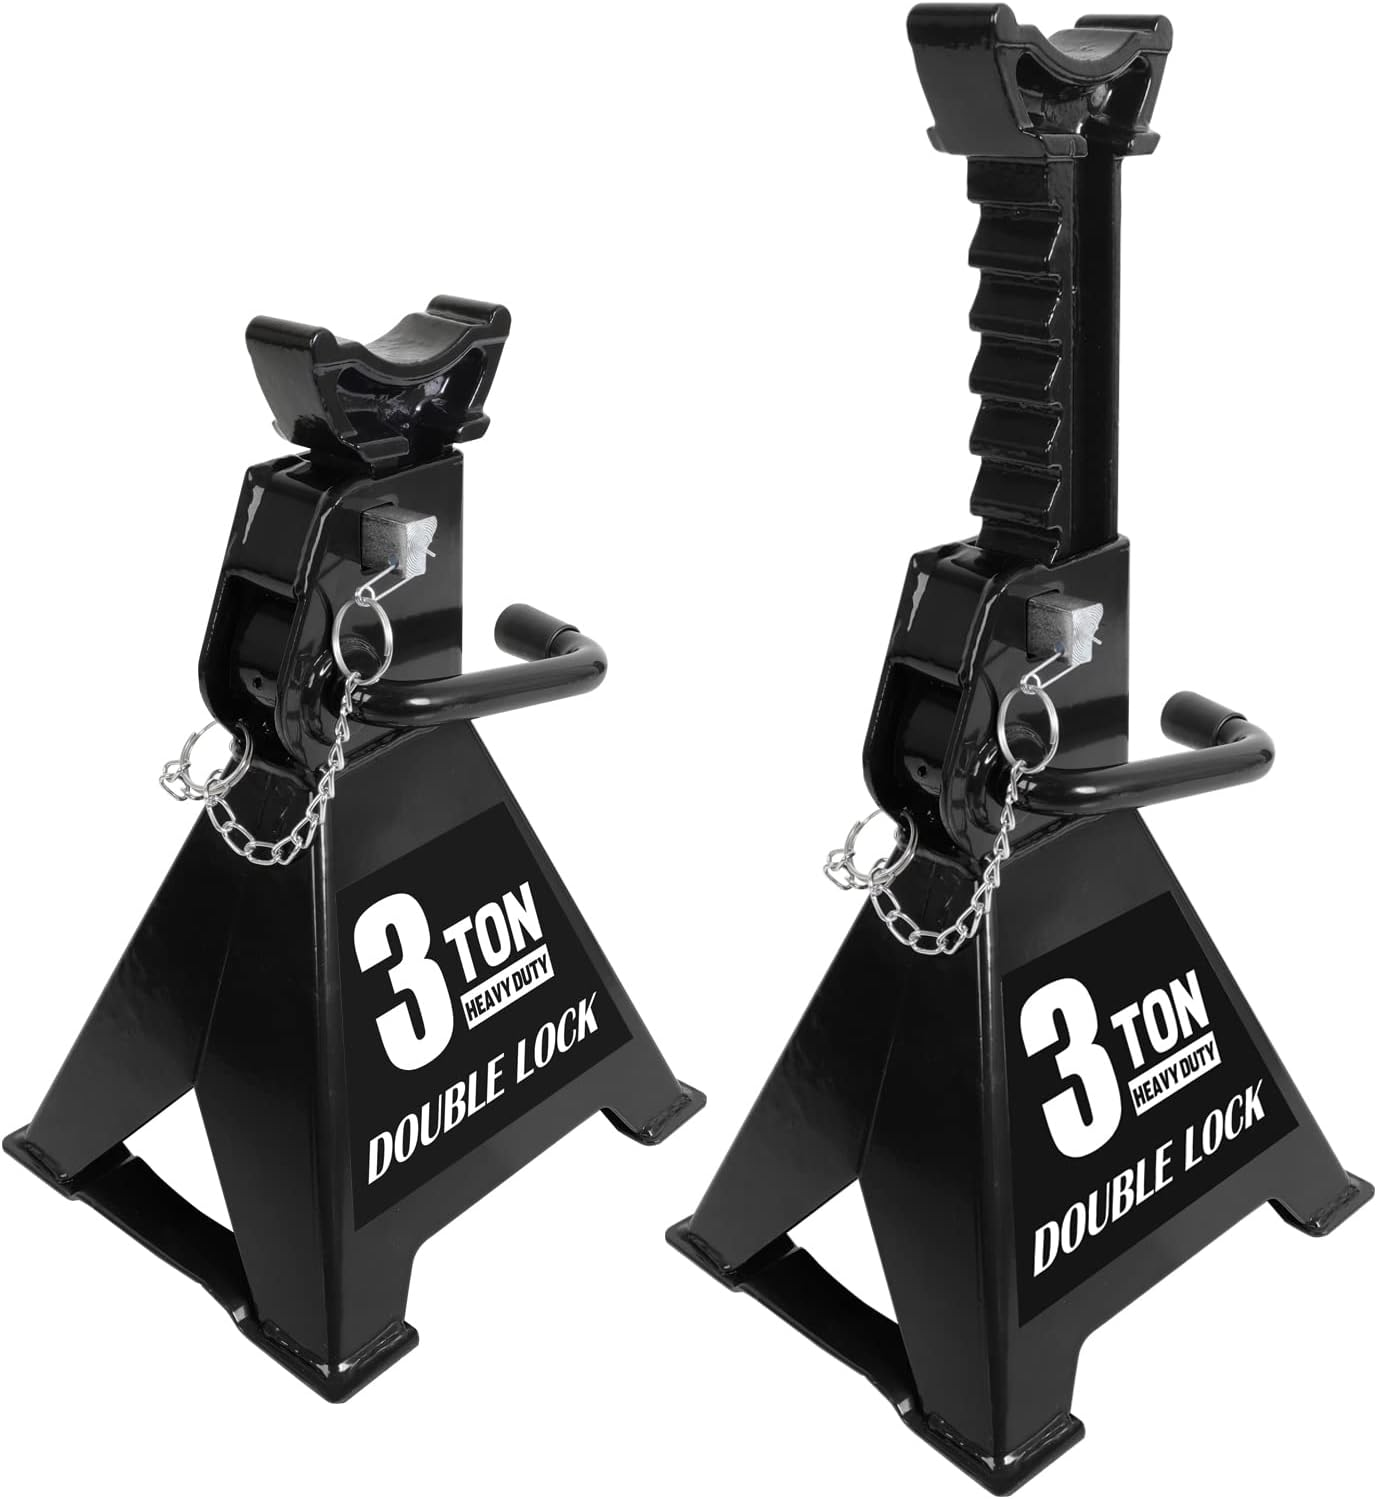 1-Pair Torin 3 Ton Steel Heavy Duty Jack Stands w/ Double Locking Pins - 6,000 lb Capacity (Black) $28.70